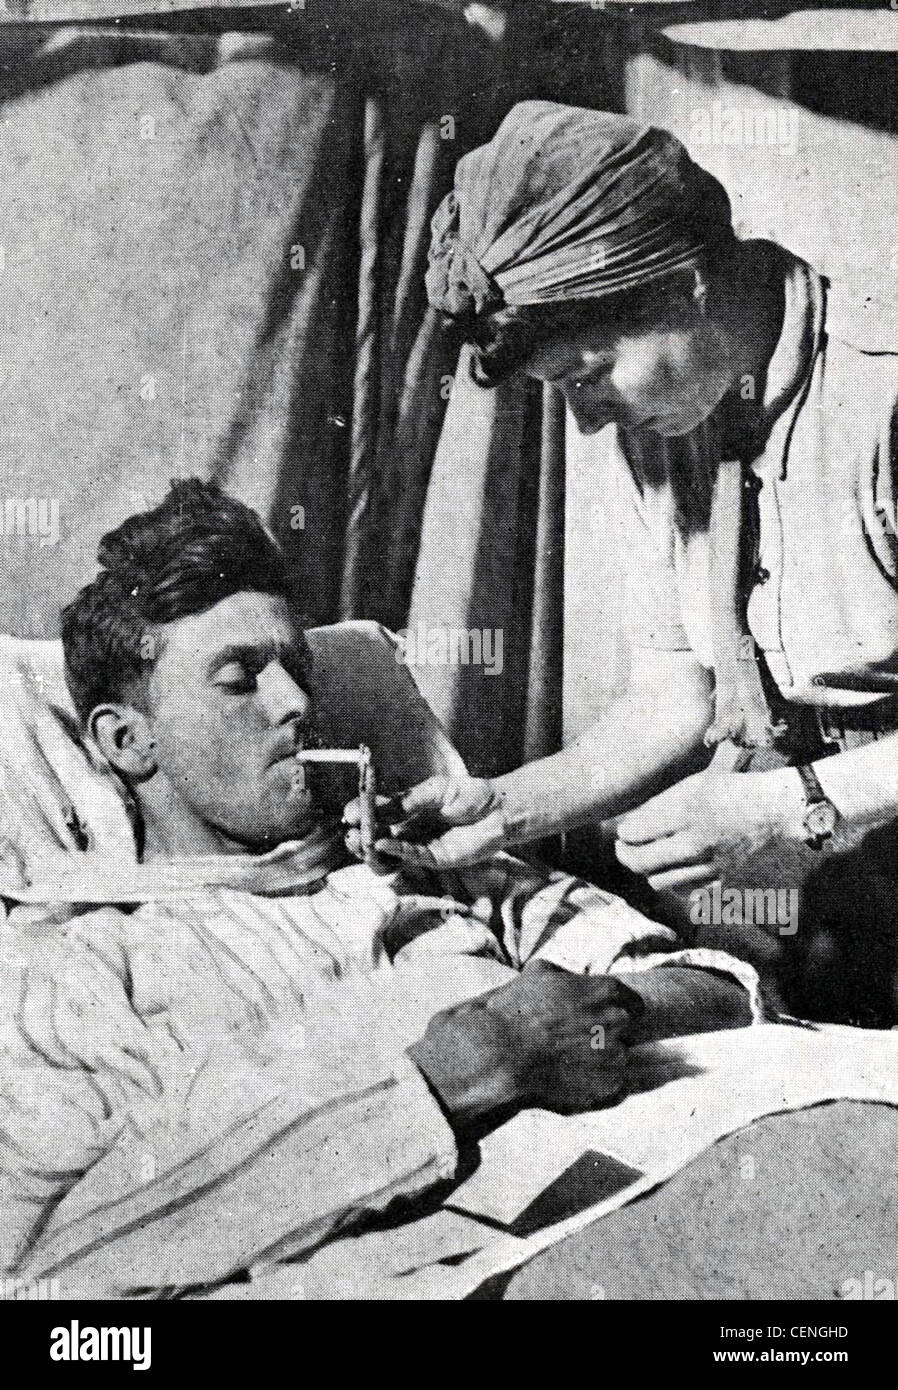 WW11. Military nurse tends a wounded soldier Stock Photo